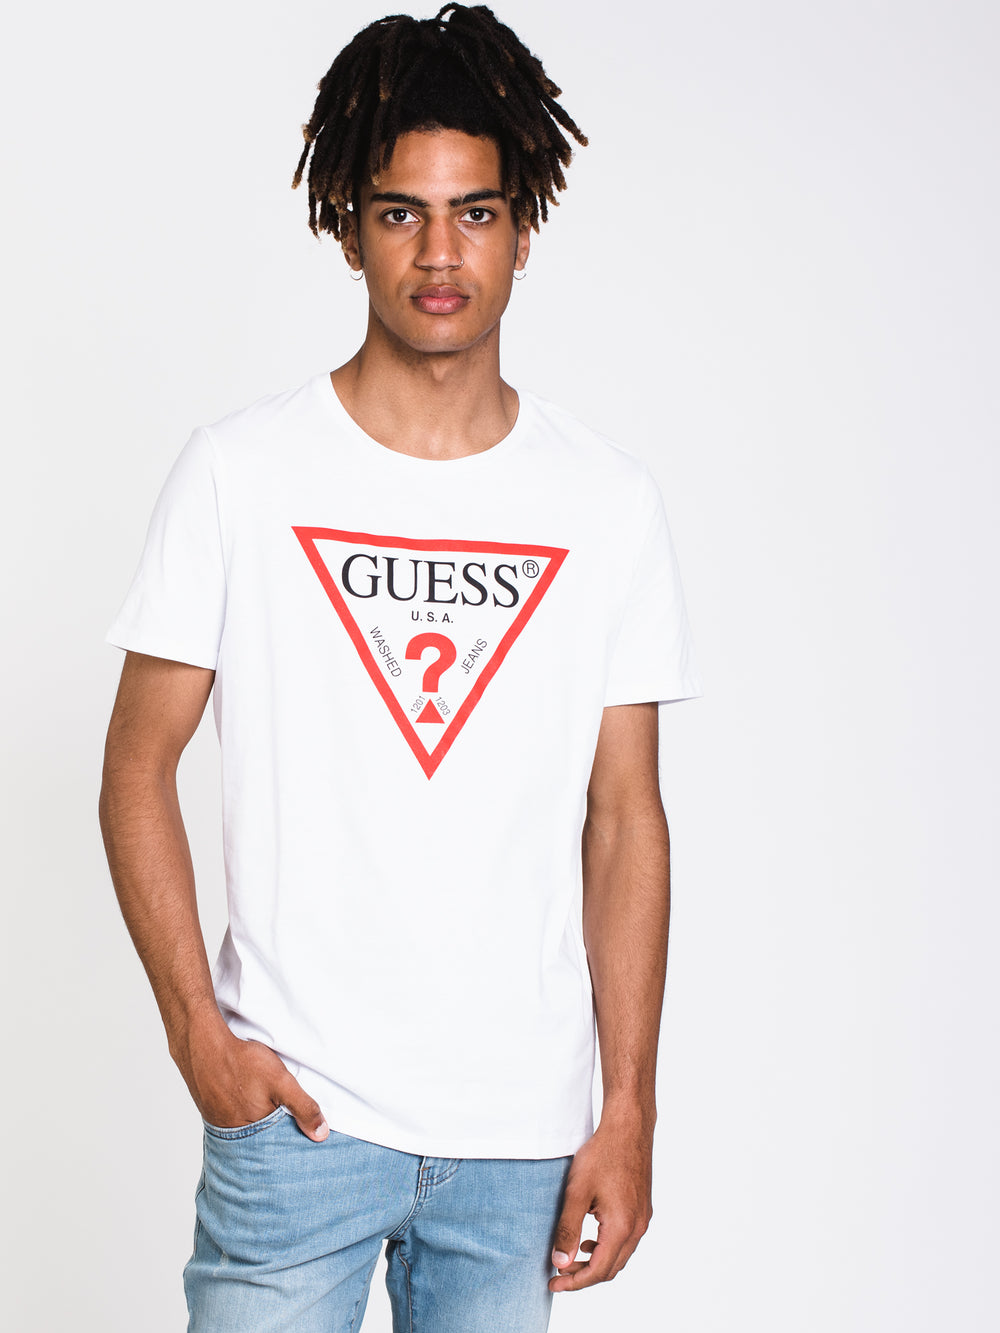 GUESS CLASSIC TRIANGLE LOGO LOGO T  - CLEARANCE